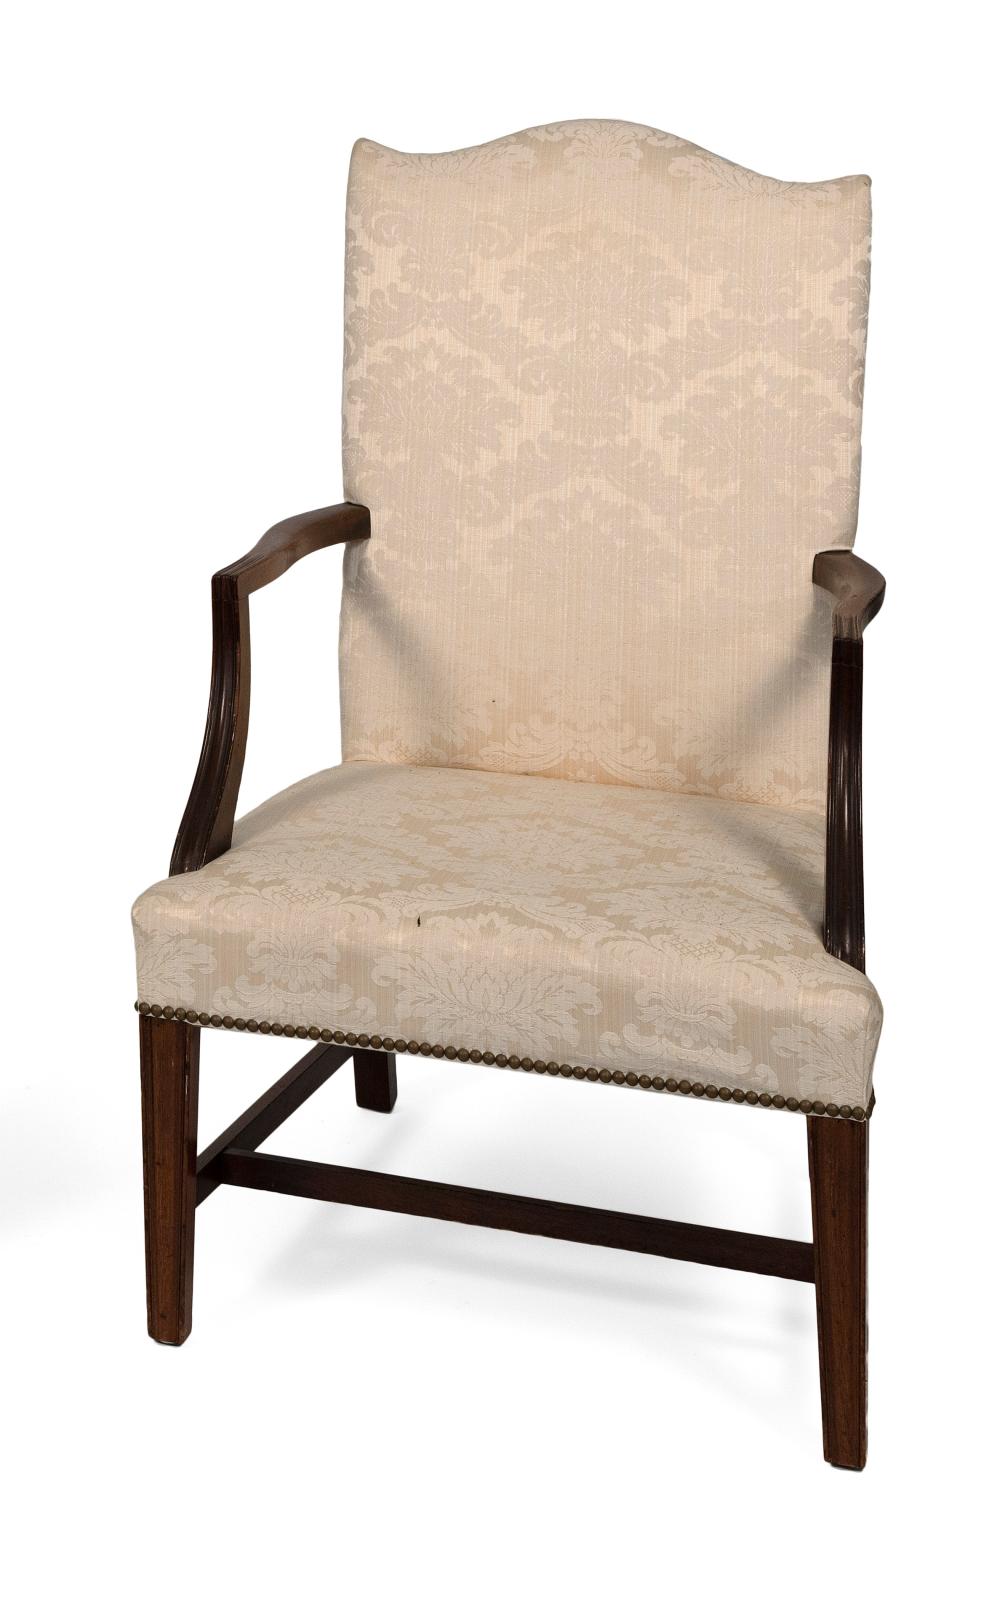 FEDERAL STYLE LOLLING CHAIR CIRCA 34d501